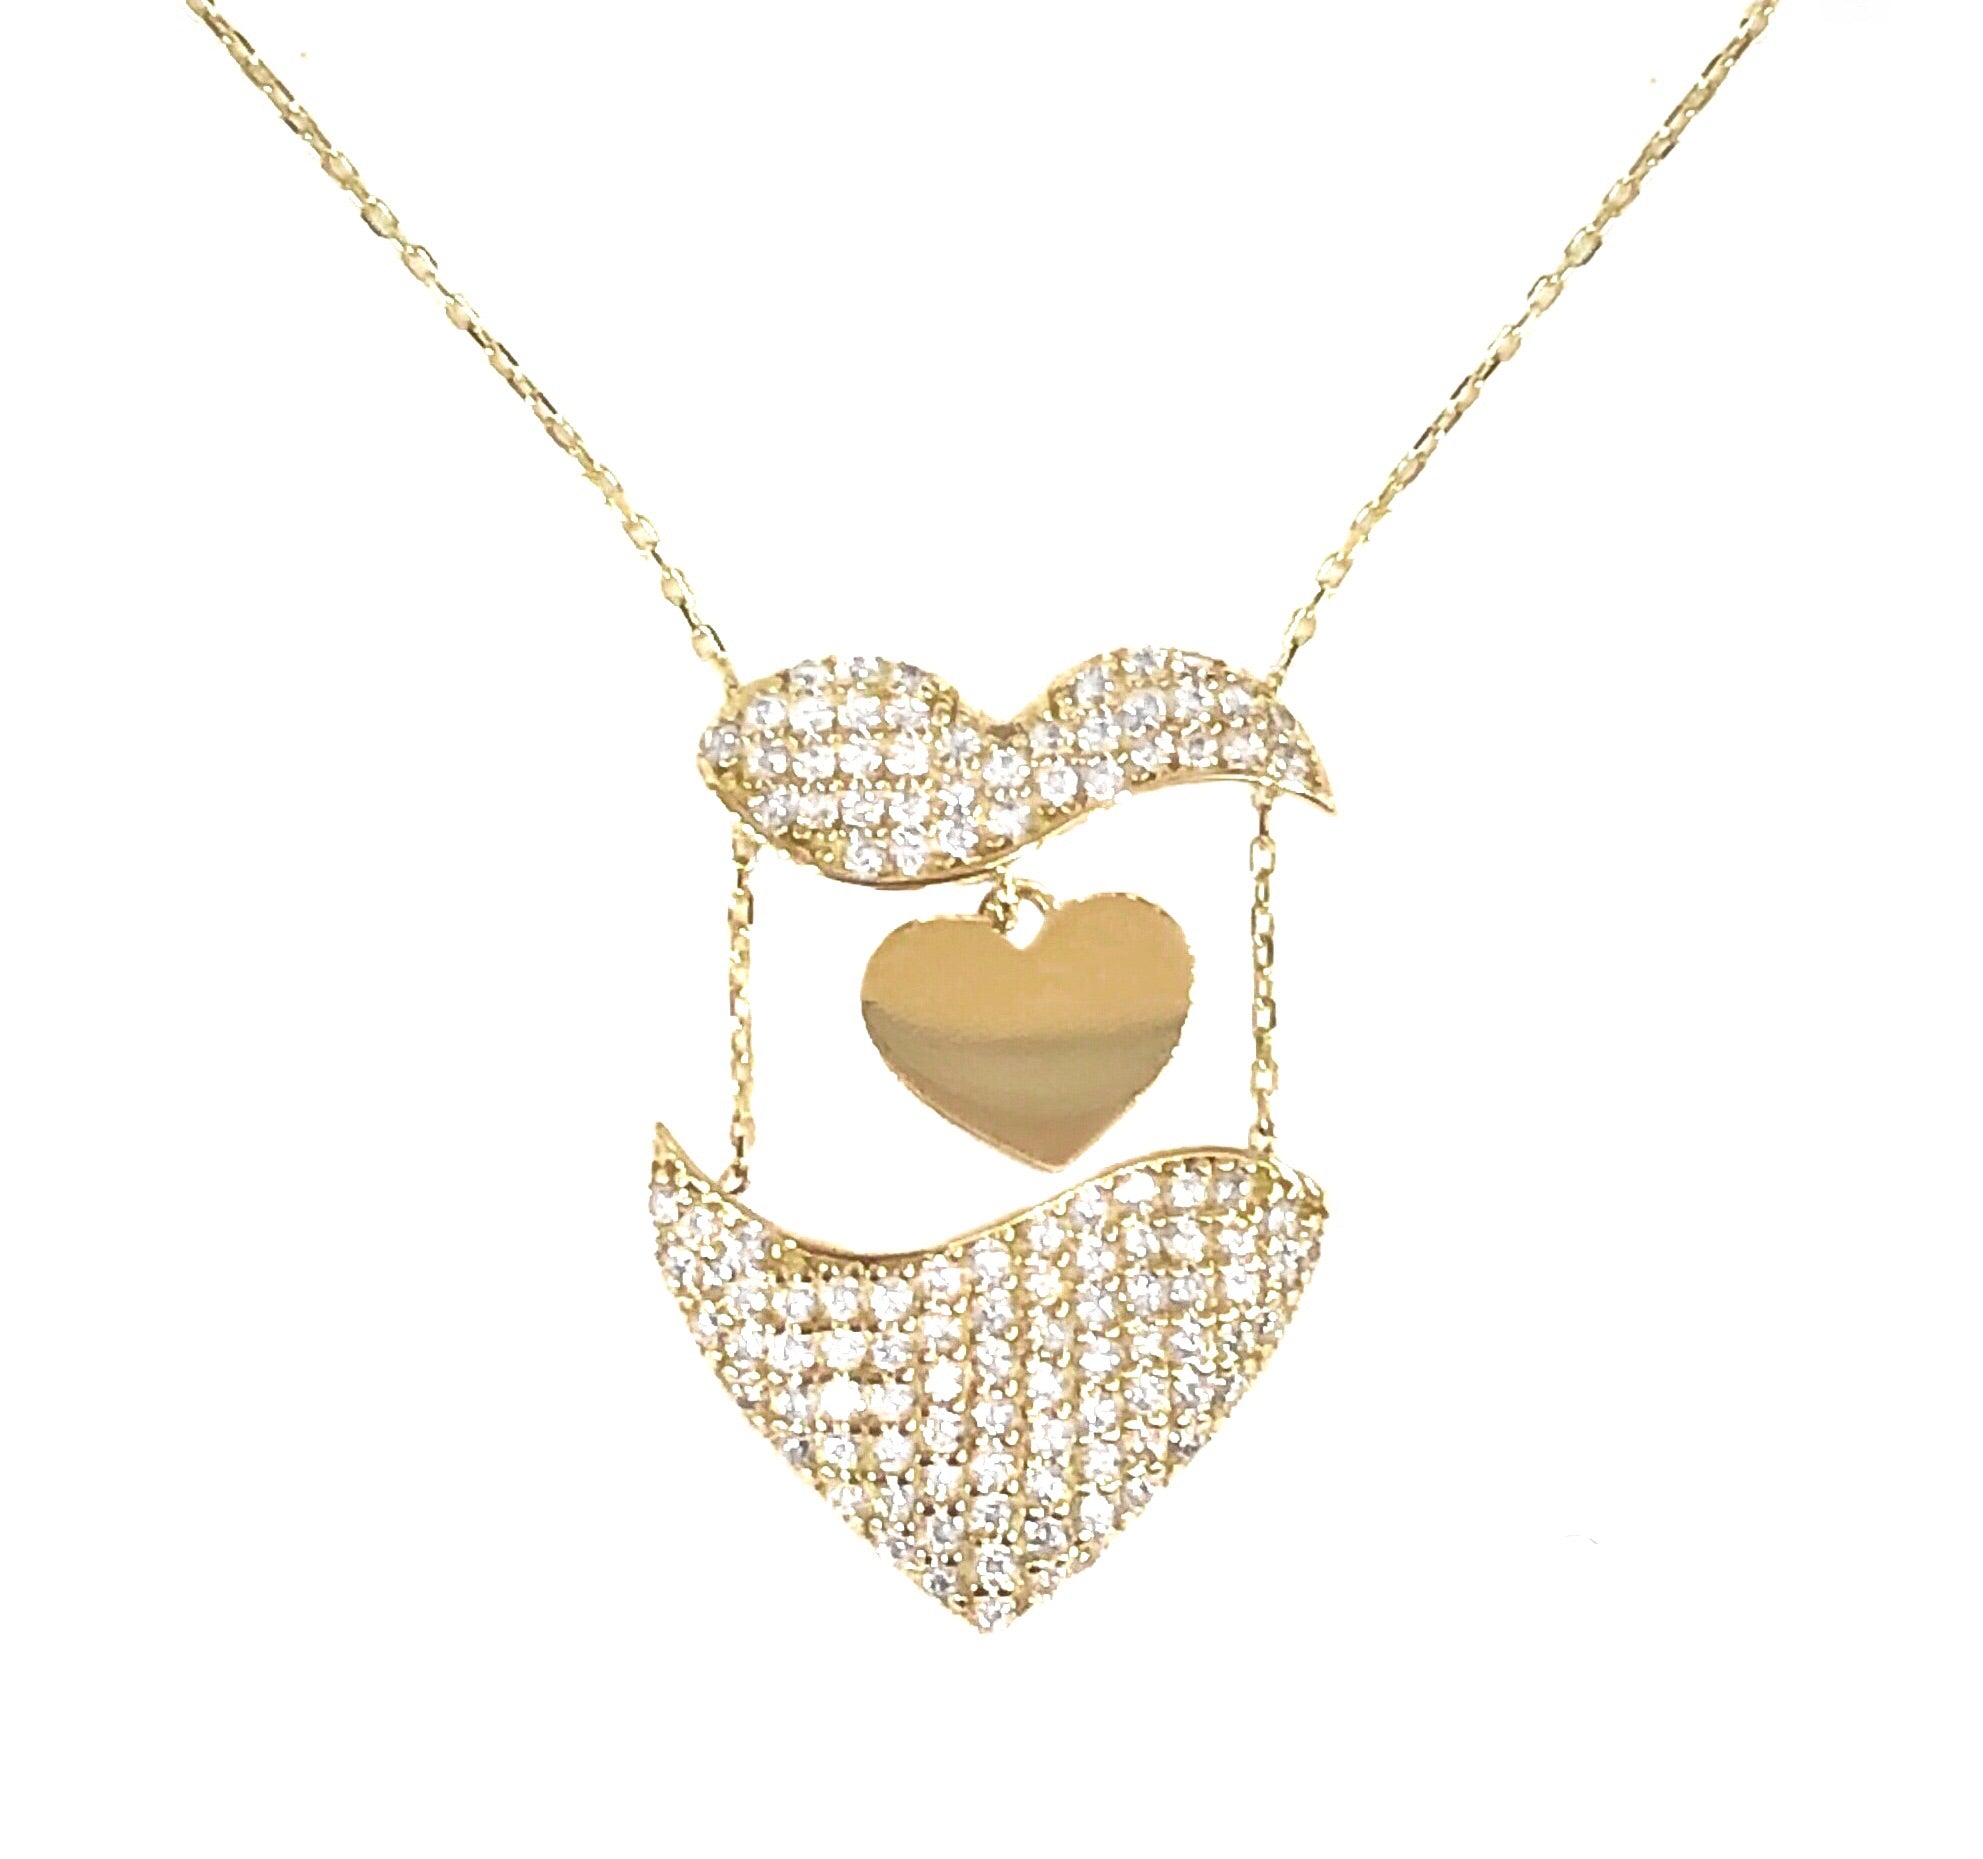 14K YELLOW GOLD PAVE PUFF PULL APART HEART NECKLACE